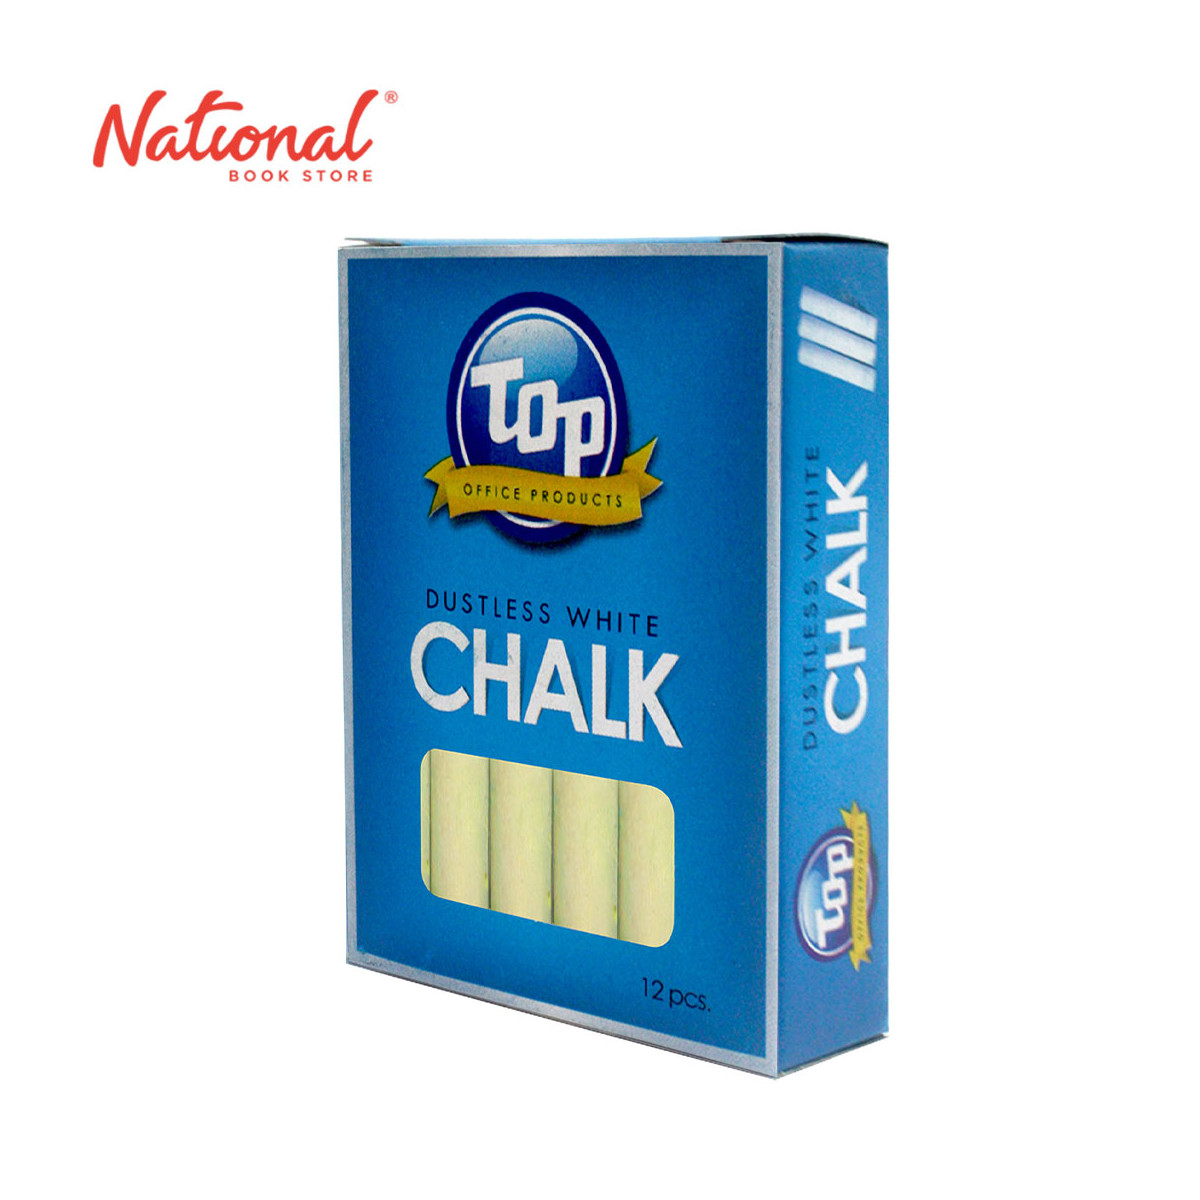 12pcs Colored Drawing Chalk for Kids School Education Stationary Office  Supplies